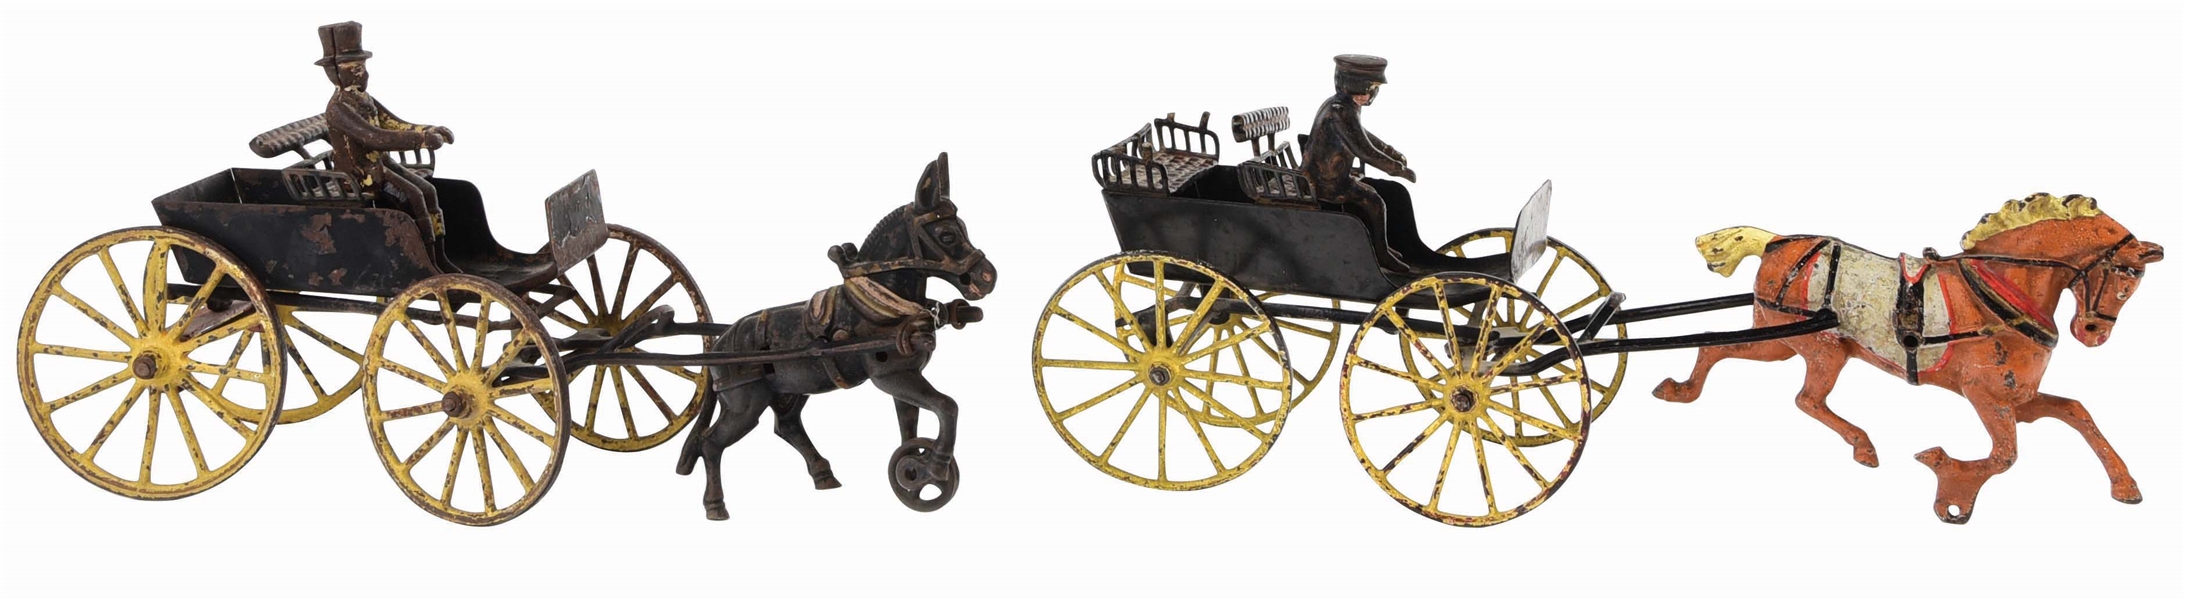 LOT OF 2: EARLY AMERICAN MADE ANIMAL-DRAWN CARTS.